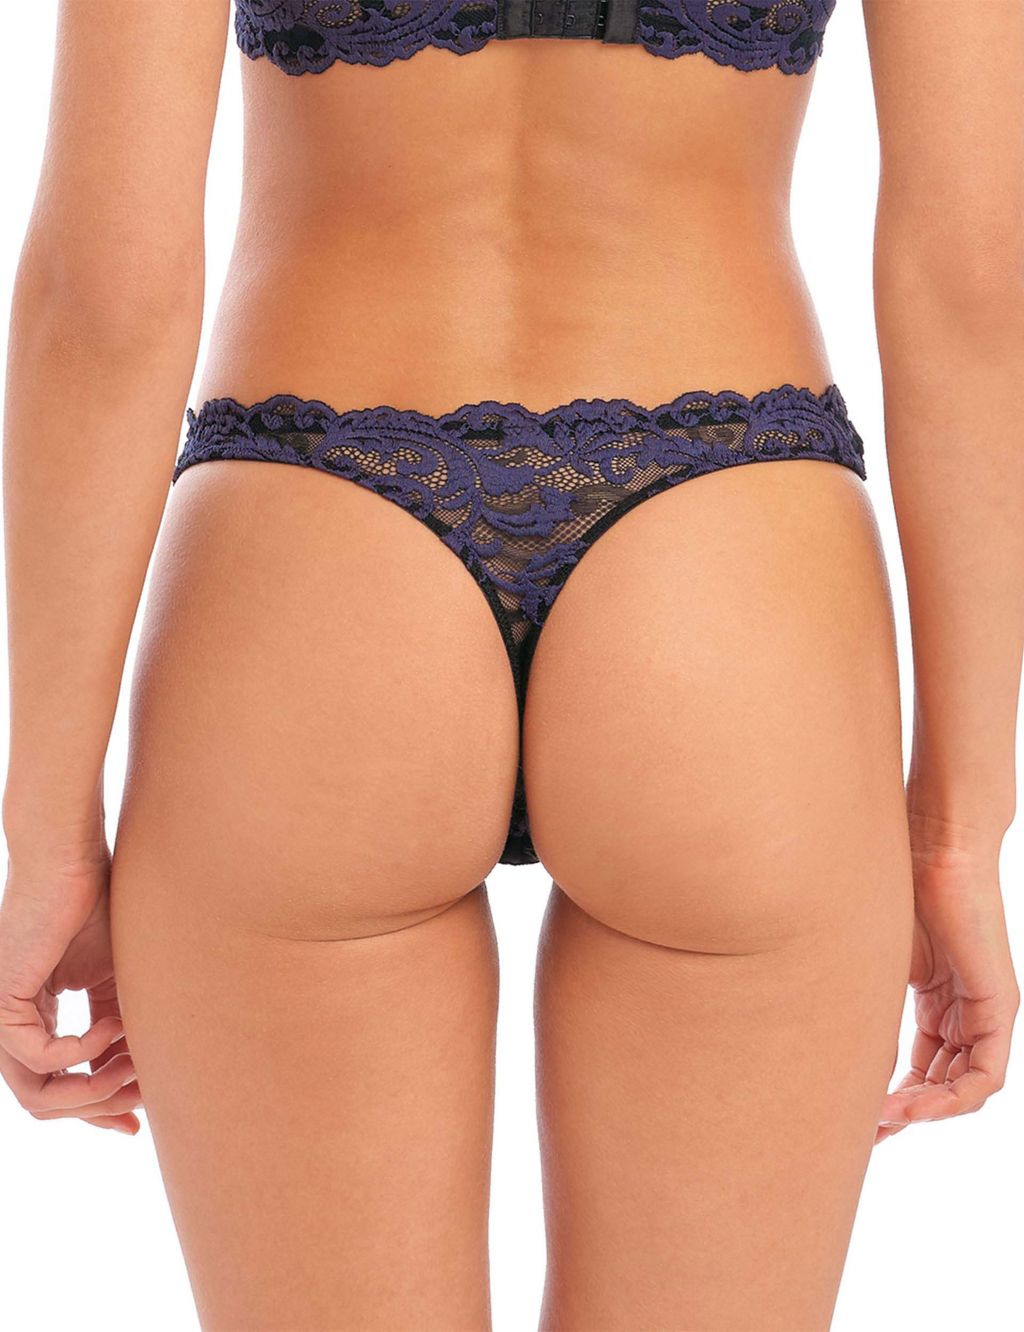 Instant Icon Floral Lace Thong image 3